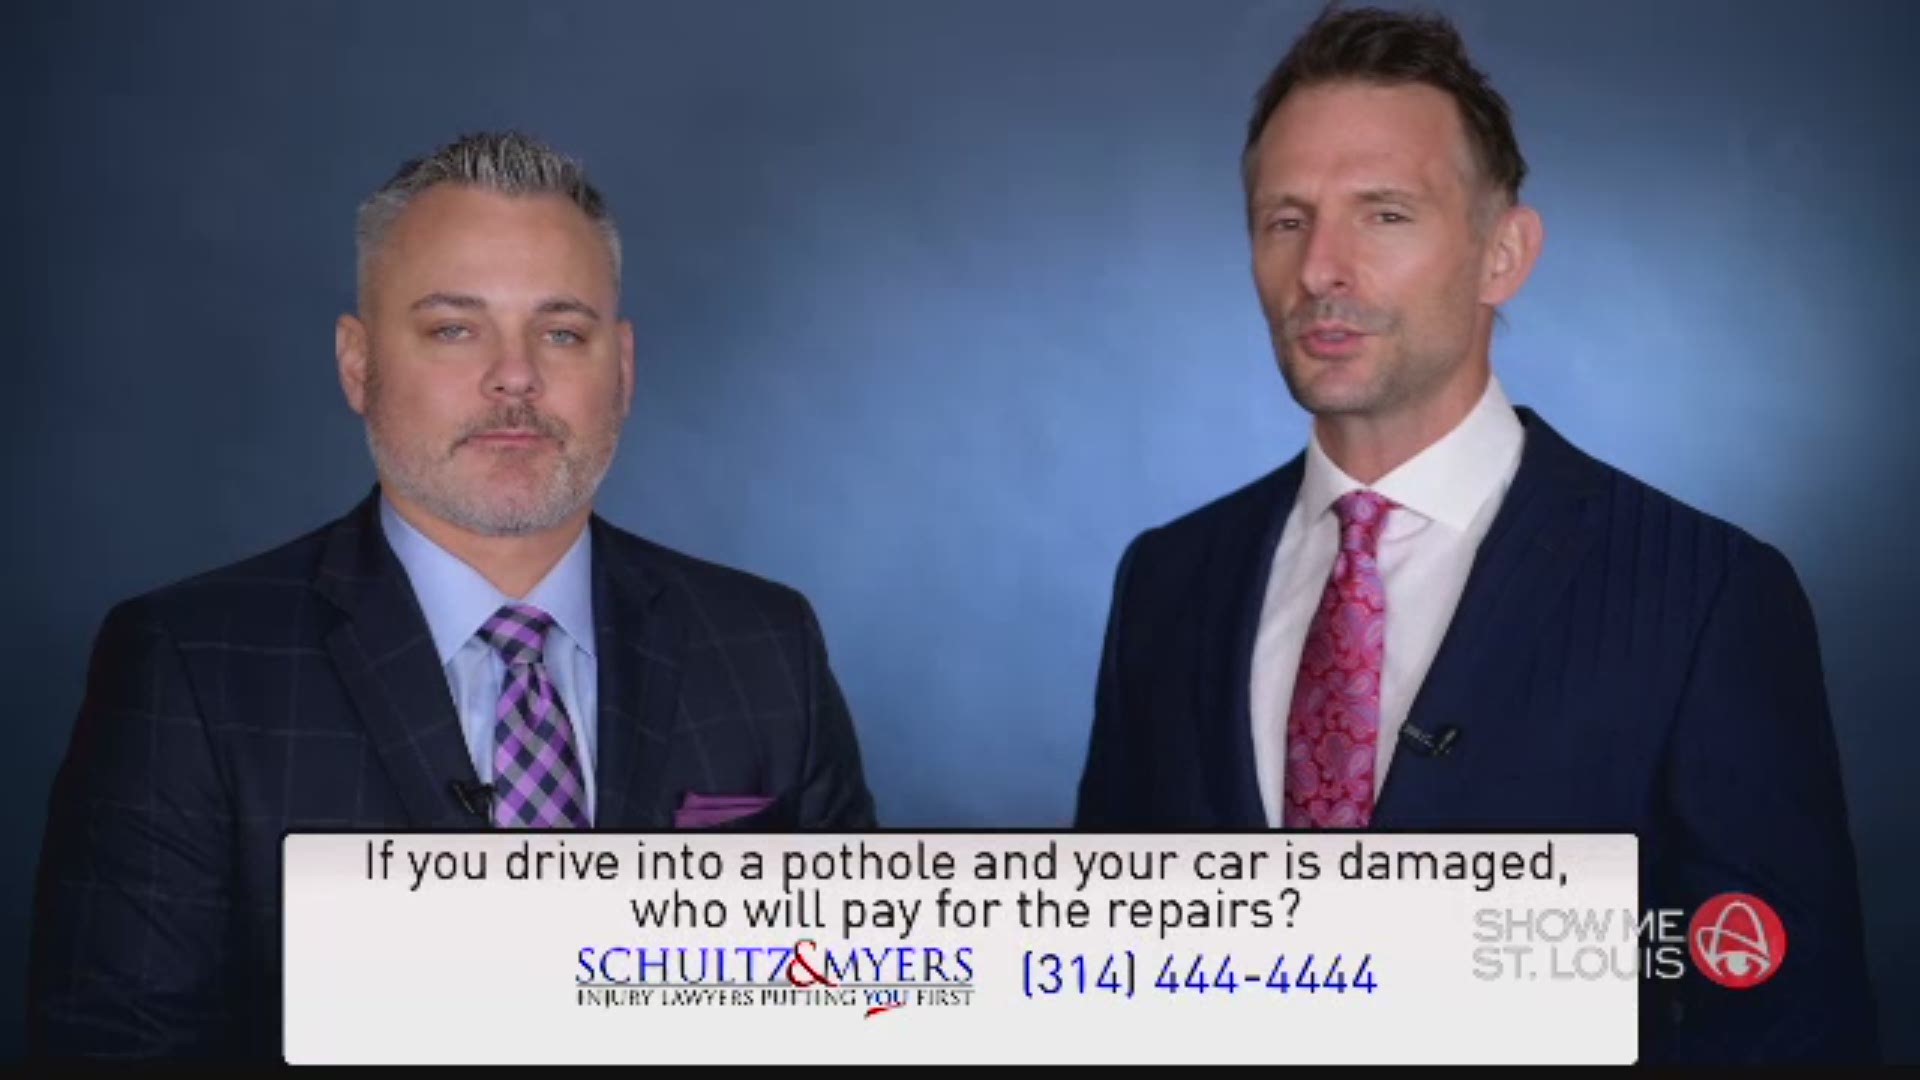 Schultz & Myers Law Firm answers who is responsible for pothole repairs.